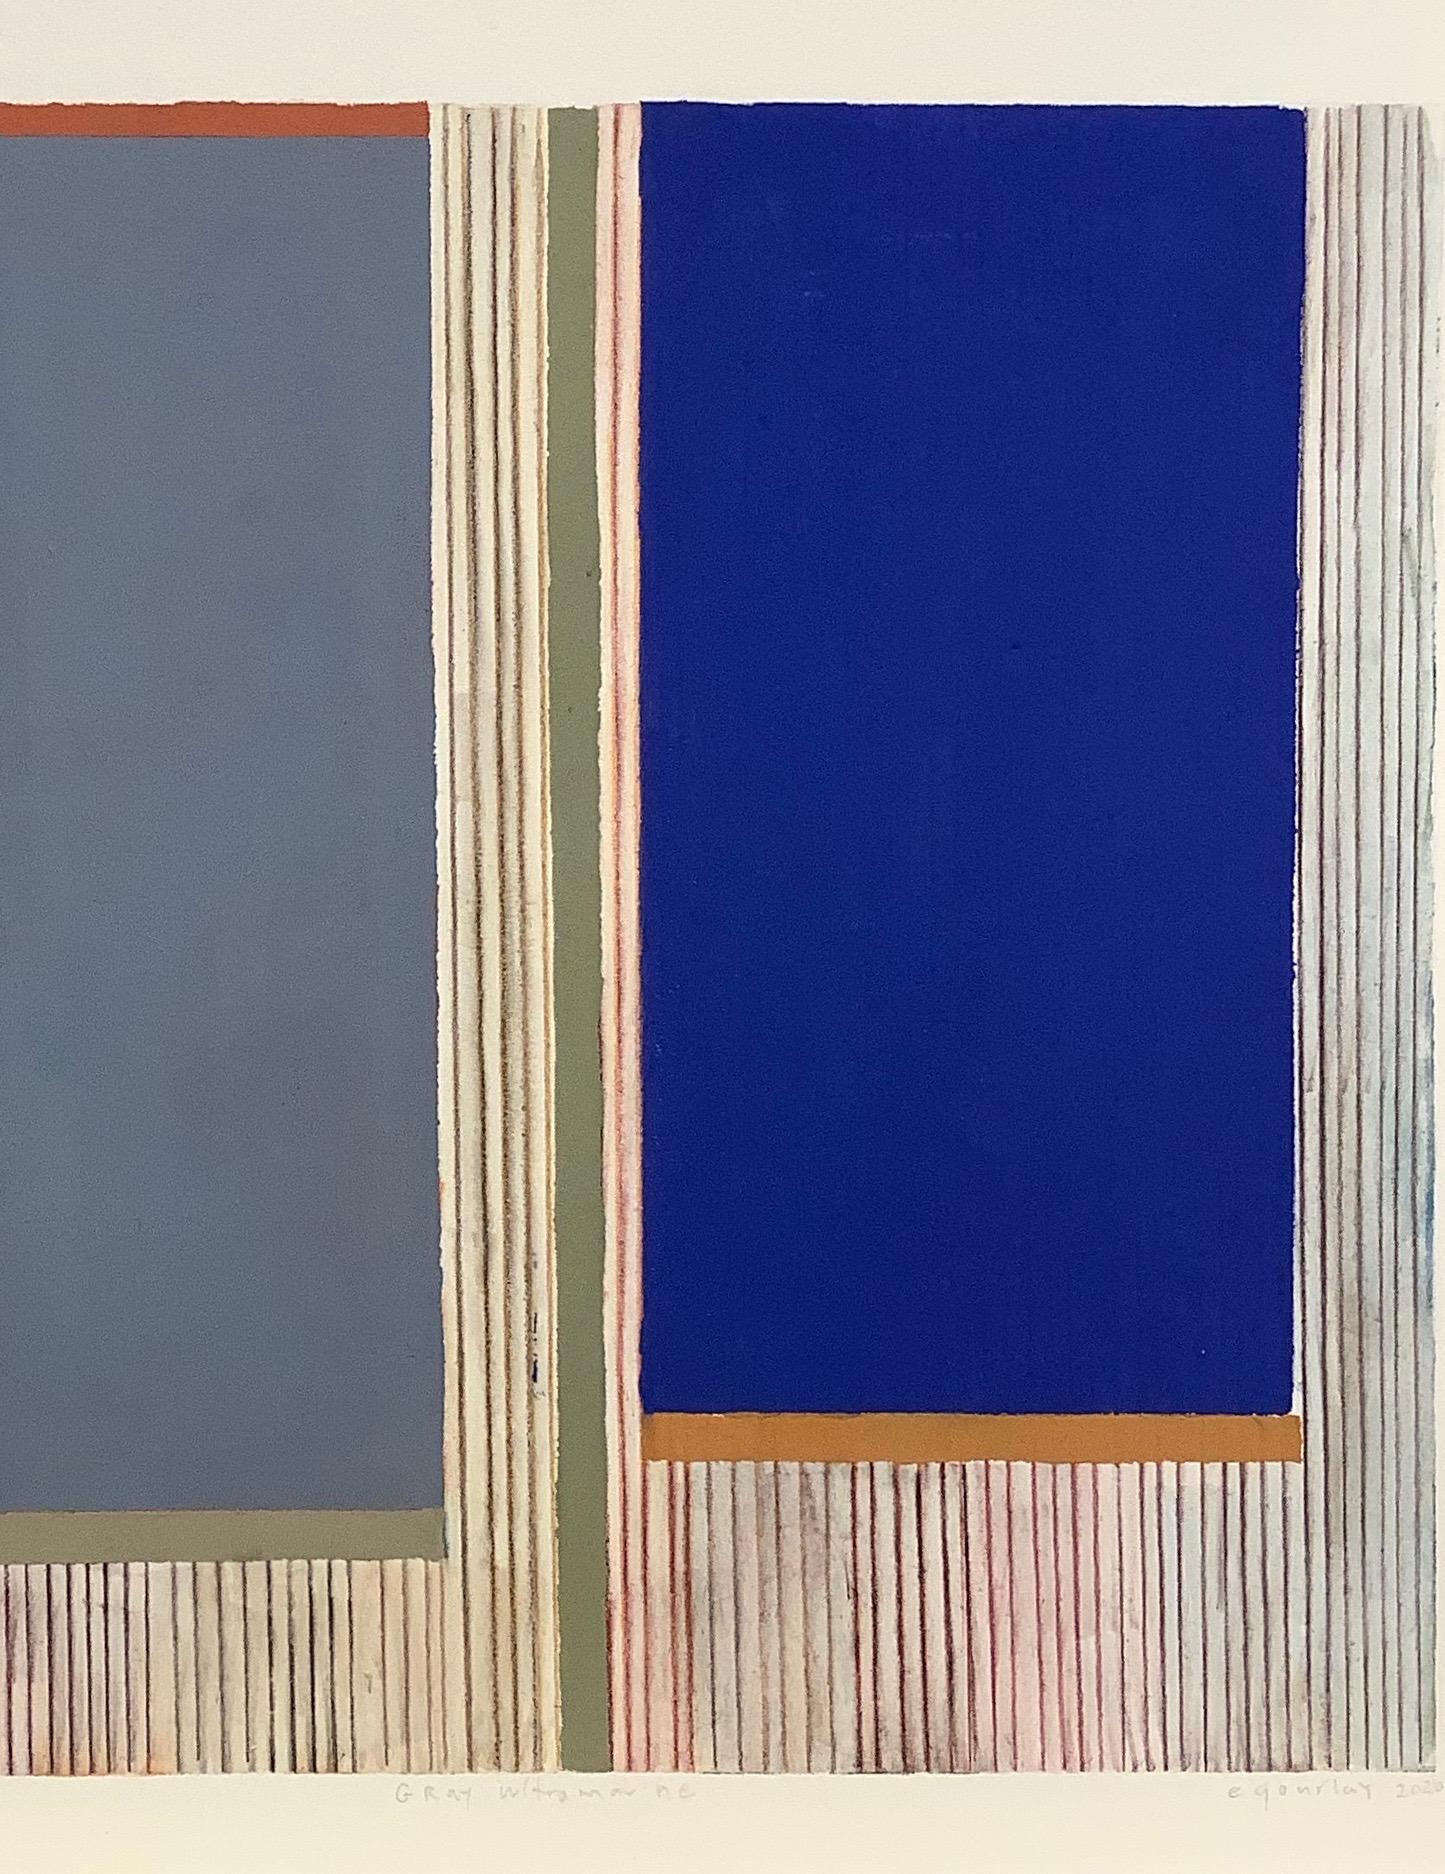 Clean and precise, carefully ordered blocks of color in shades of cobalt blue, light sage green, and dark orange are rich against the neutral beige color of the paper. Vertical blocks of bright cobalt blue and gray are framed by horizontal, thin